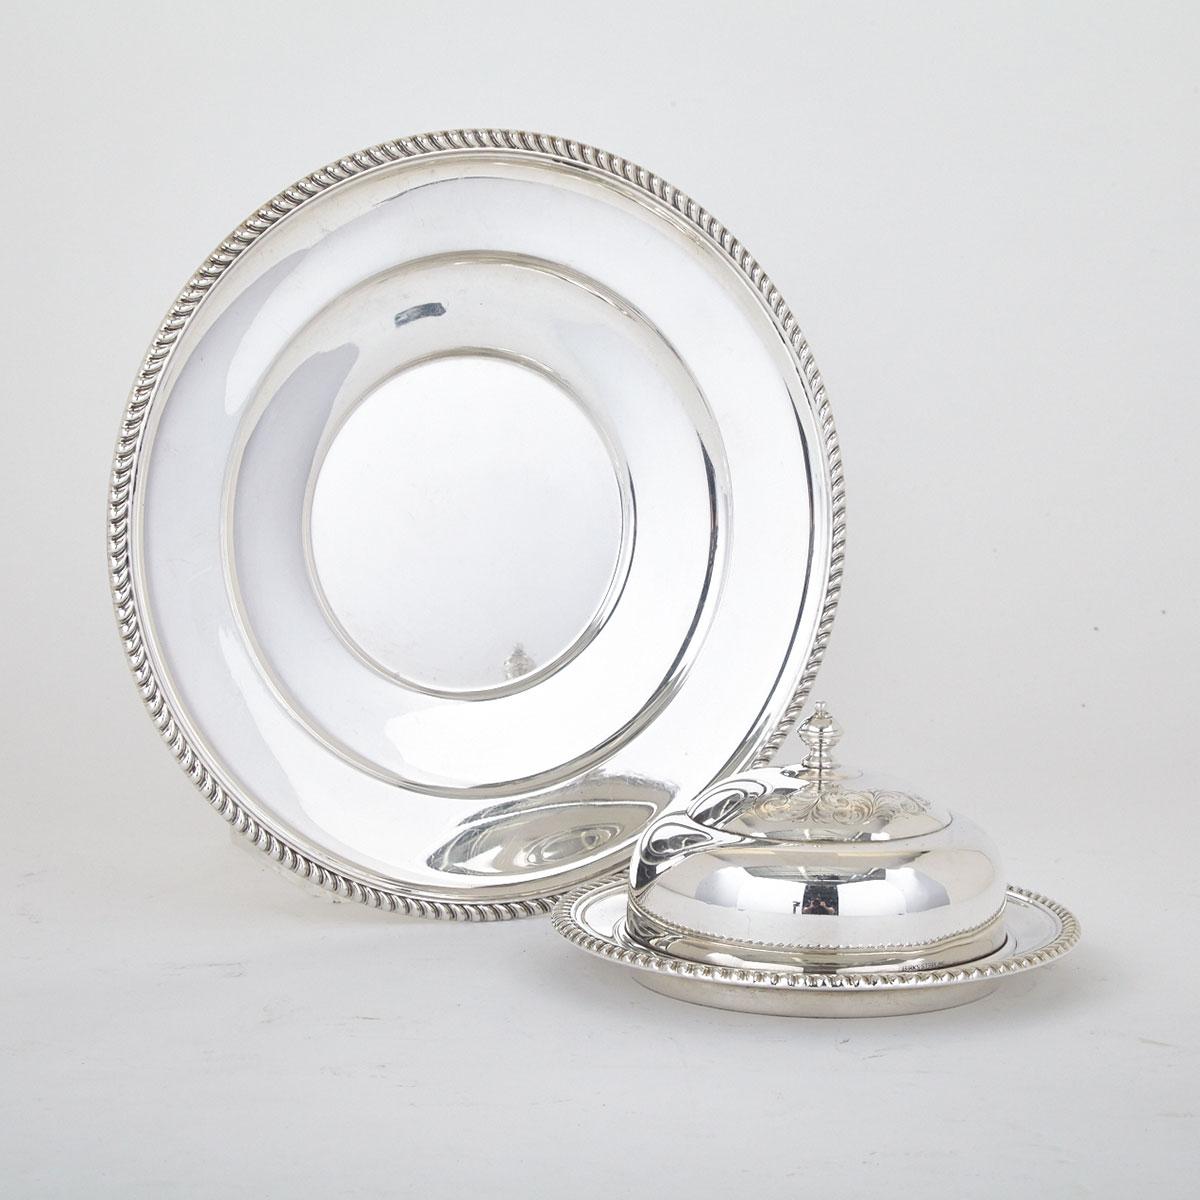 Canadian Silver Covered Butter Dish and a Cake Plate, Henry Birks & Sons, Montreal, Que., 1957/59